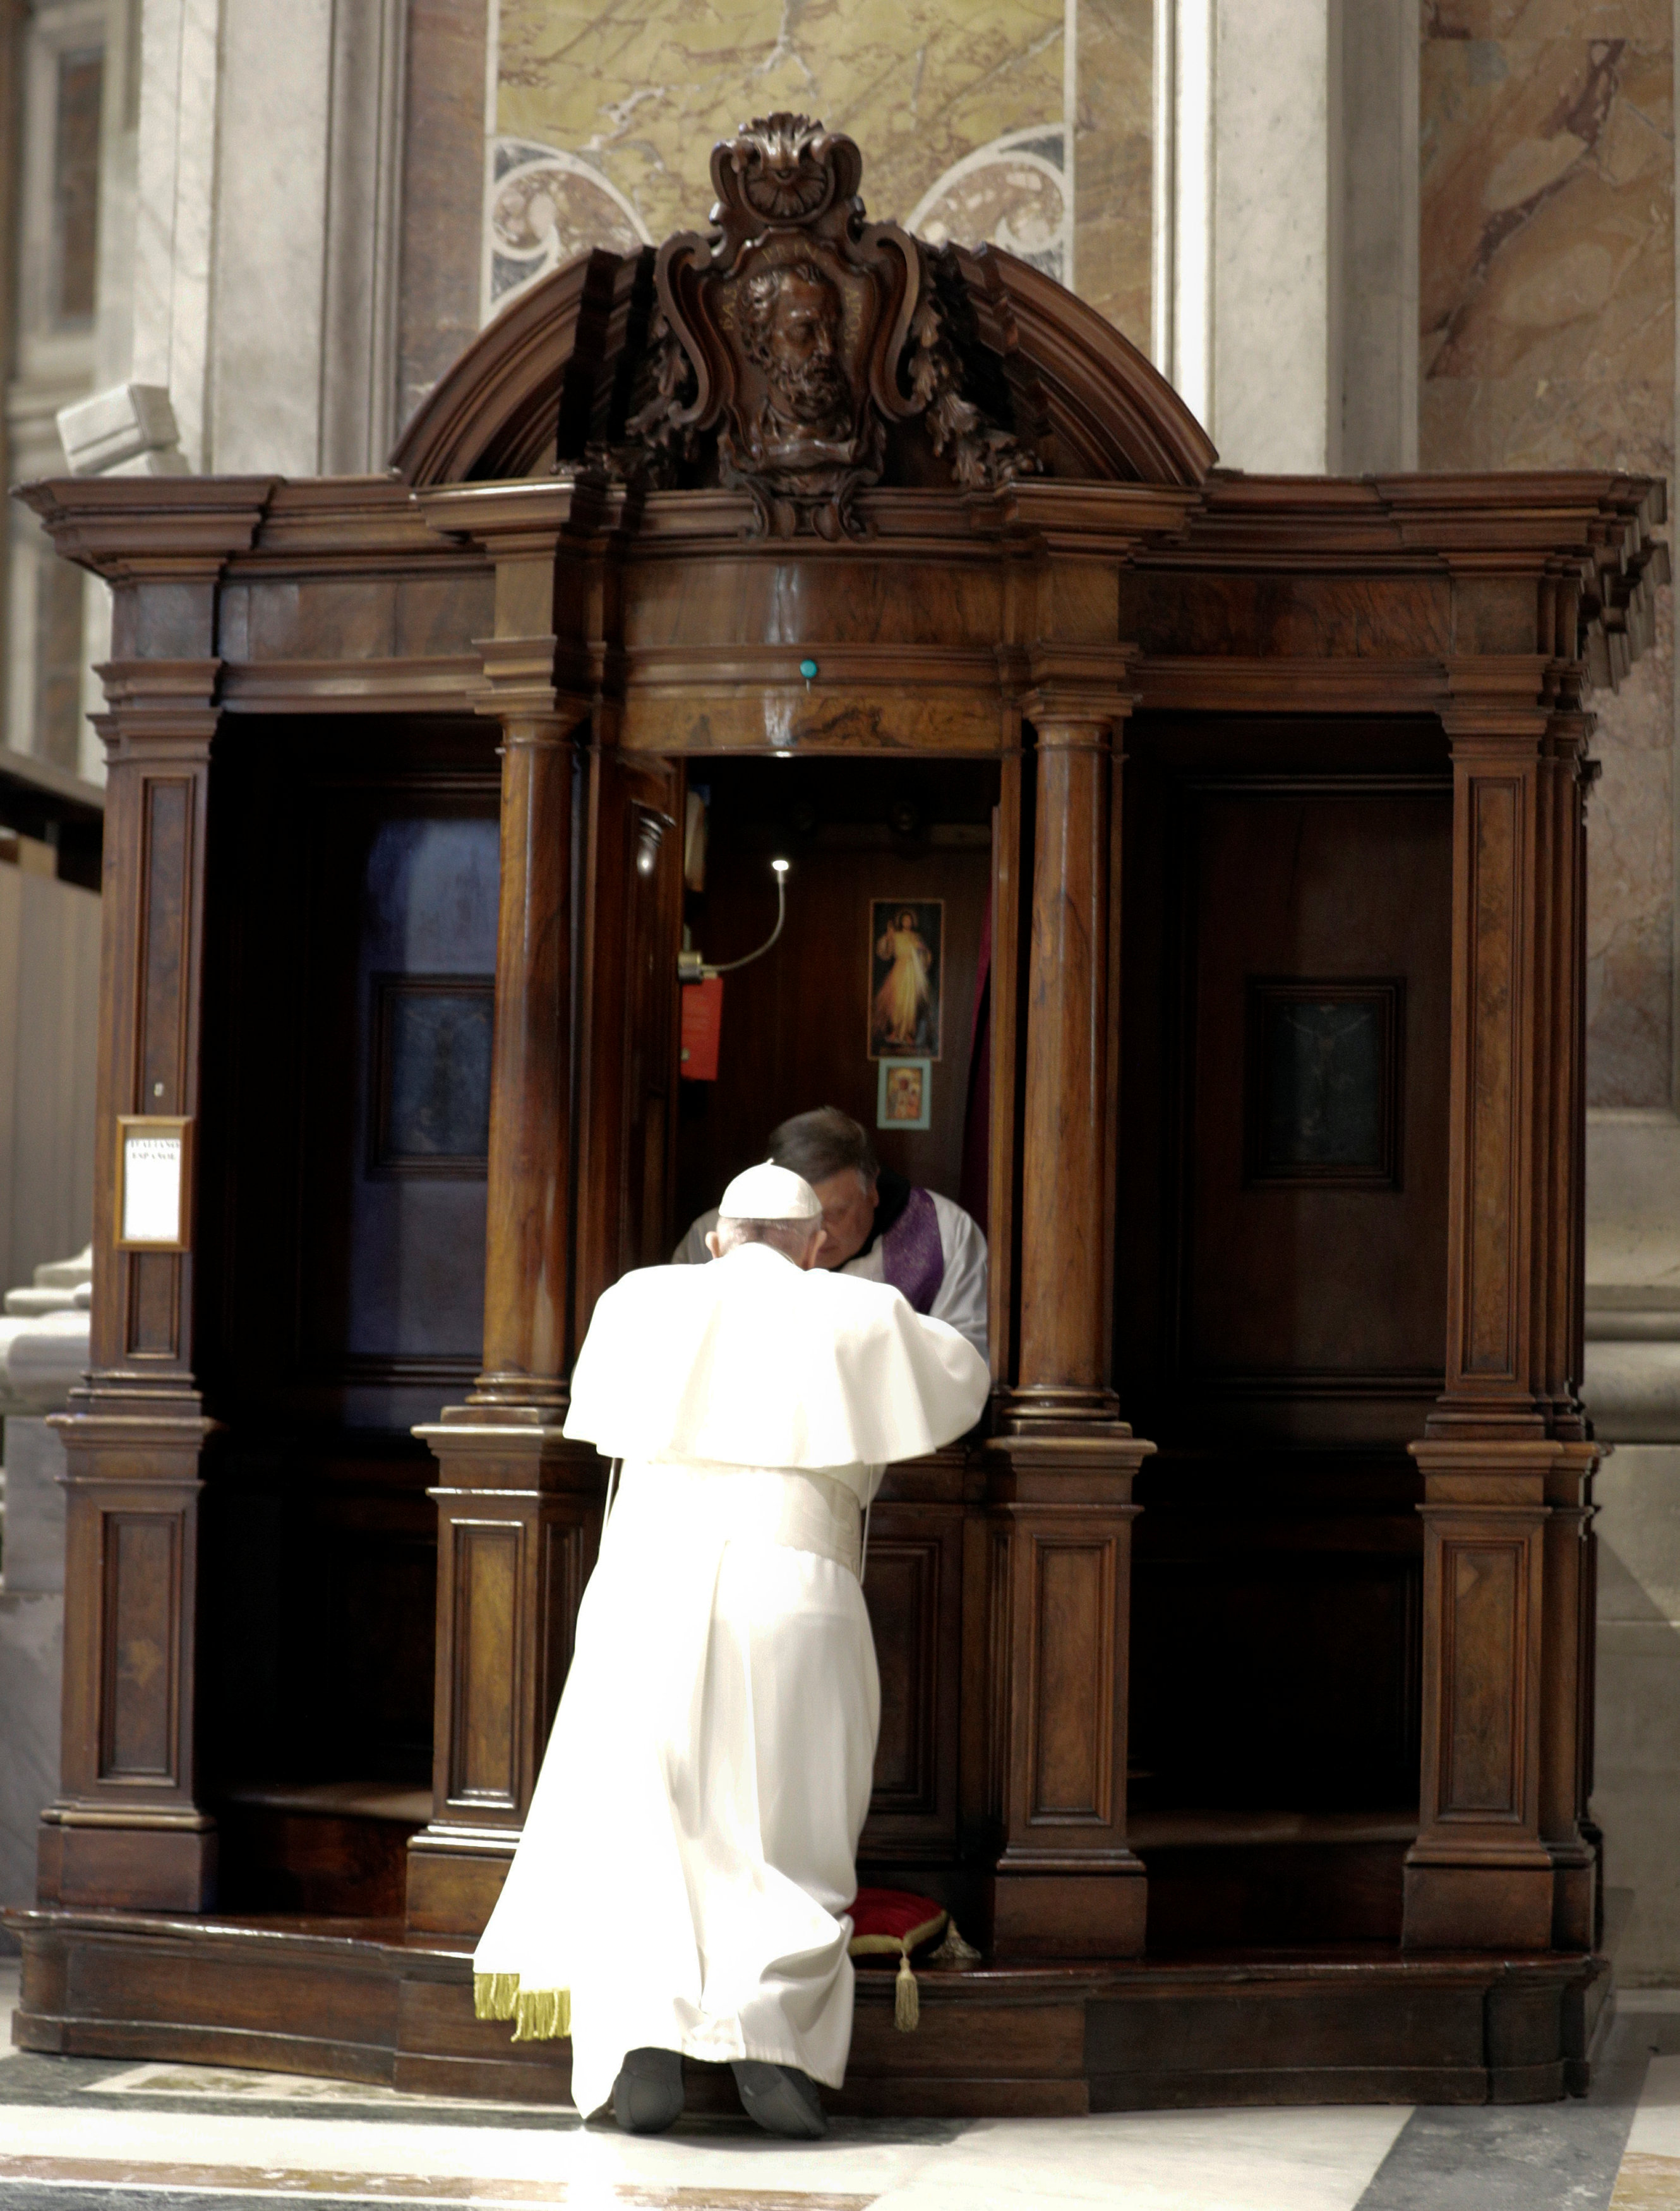 Secrecy of confession must never be violated, Vatican says